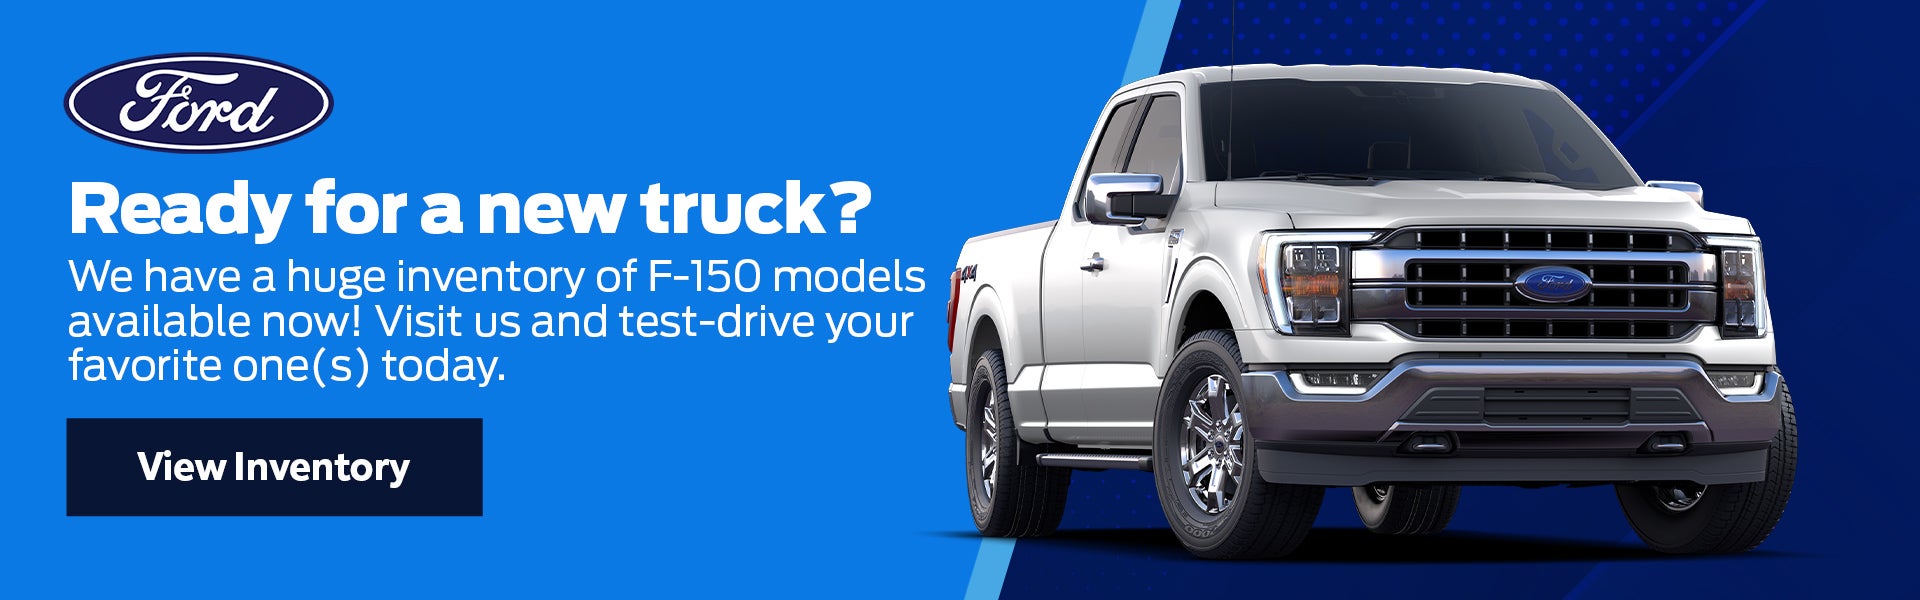 Test drive a new F-150 model today!